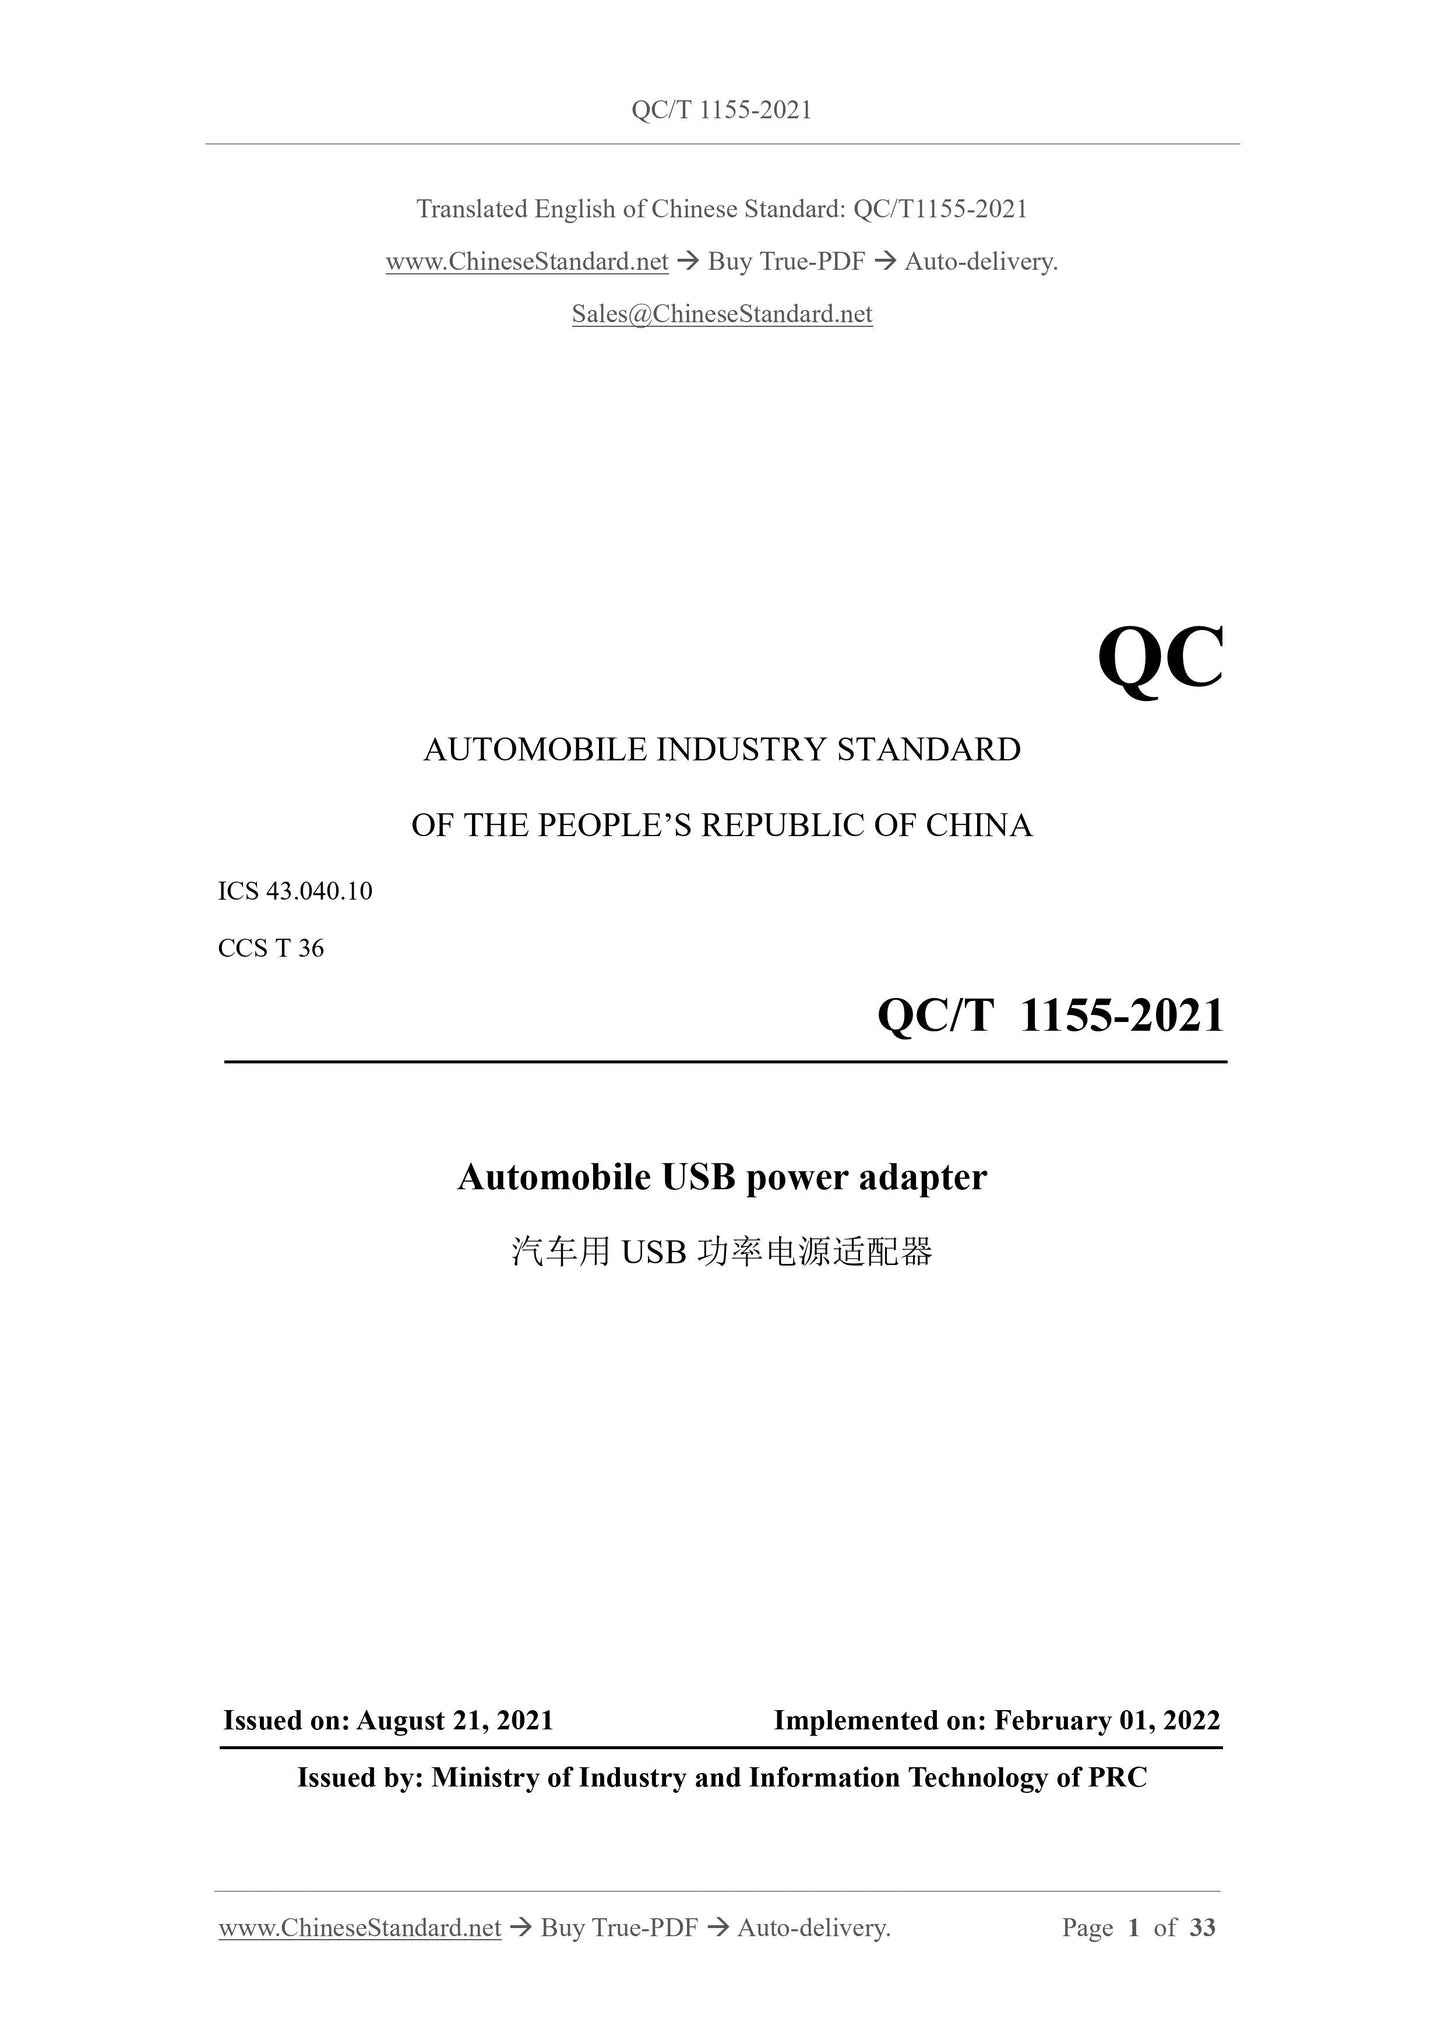 QC/T 1155-2021 Page 1